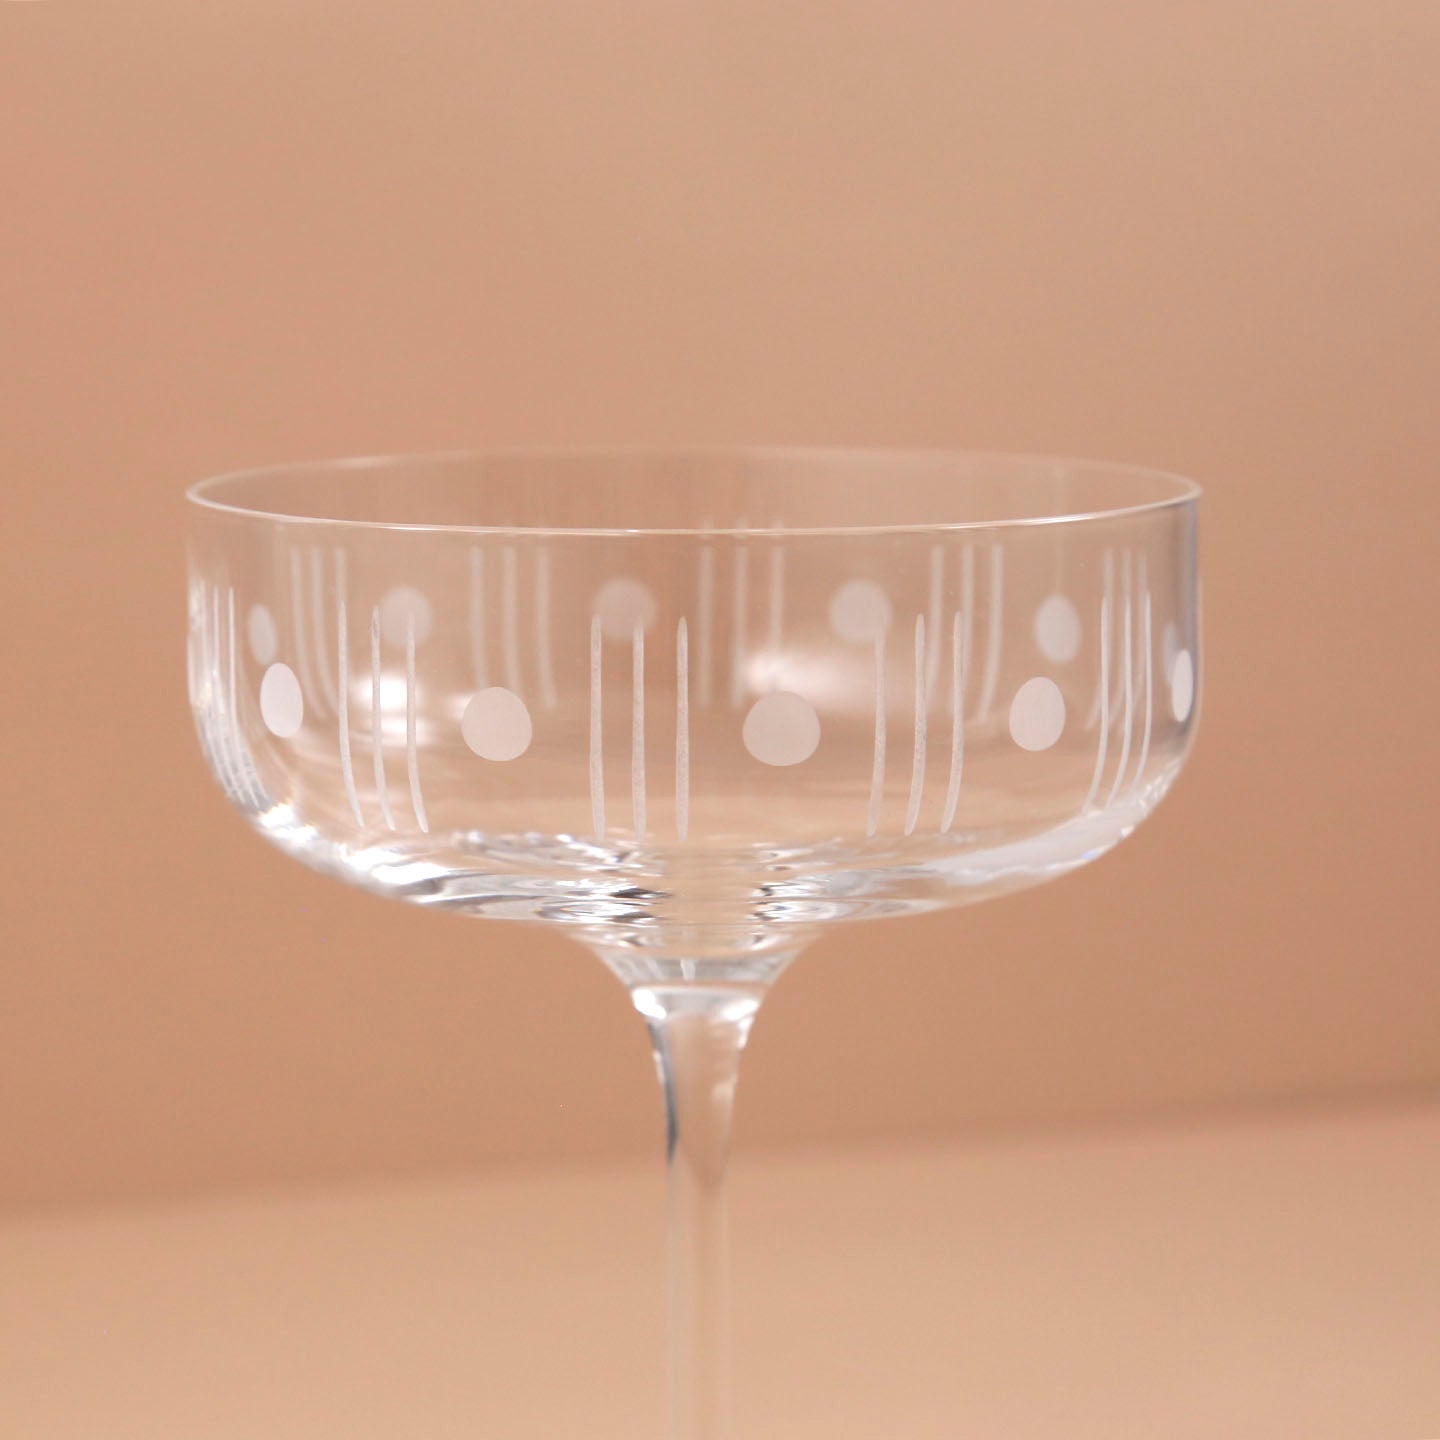 Modern Etched Glass Martini Glasses #2949